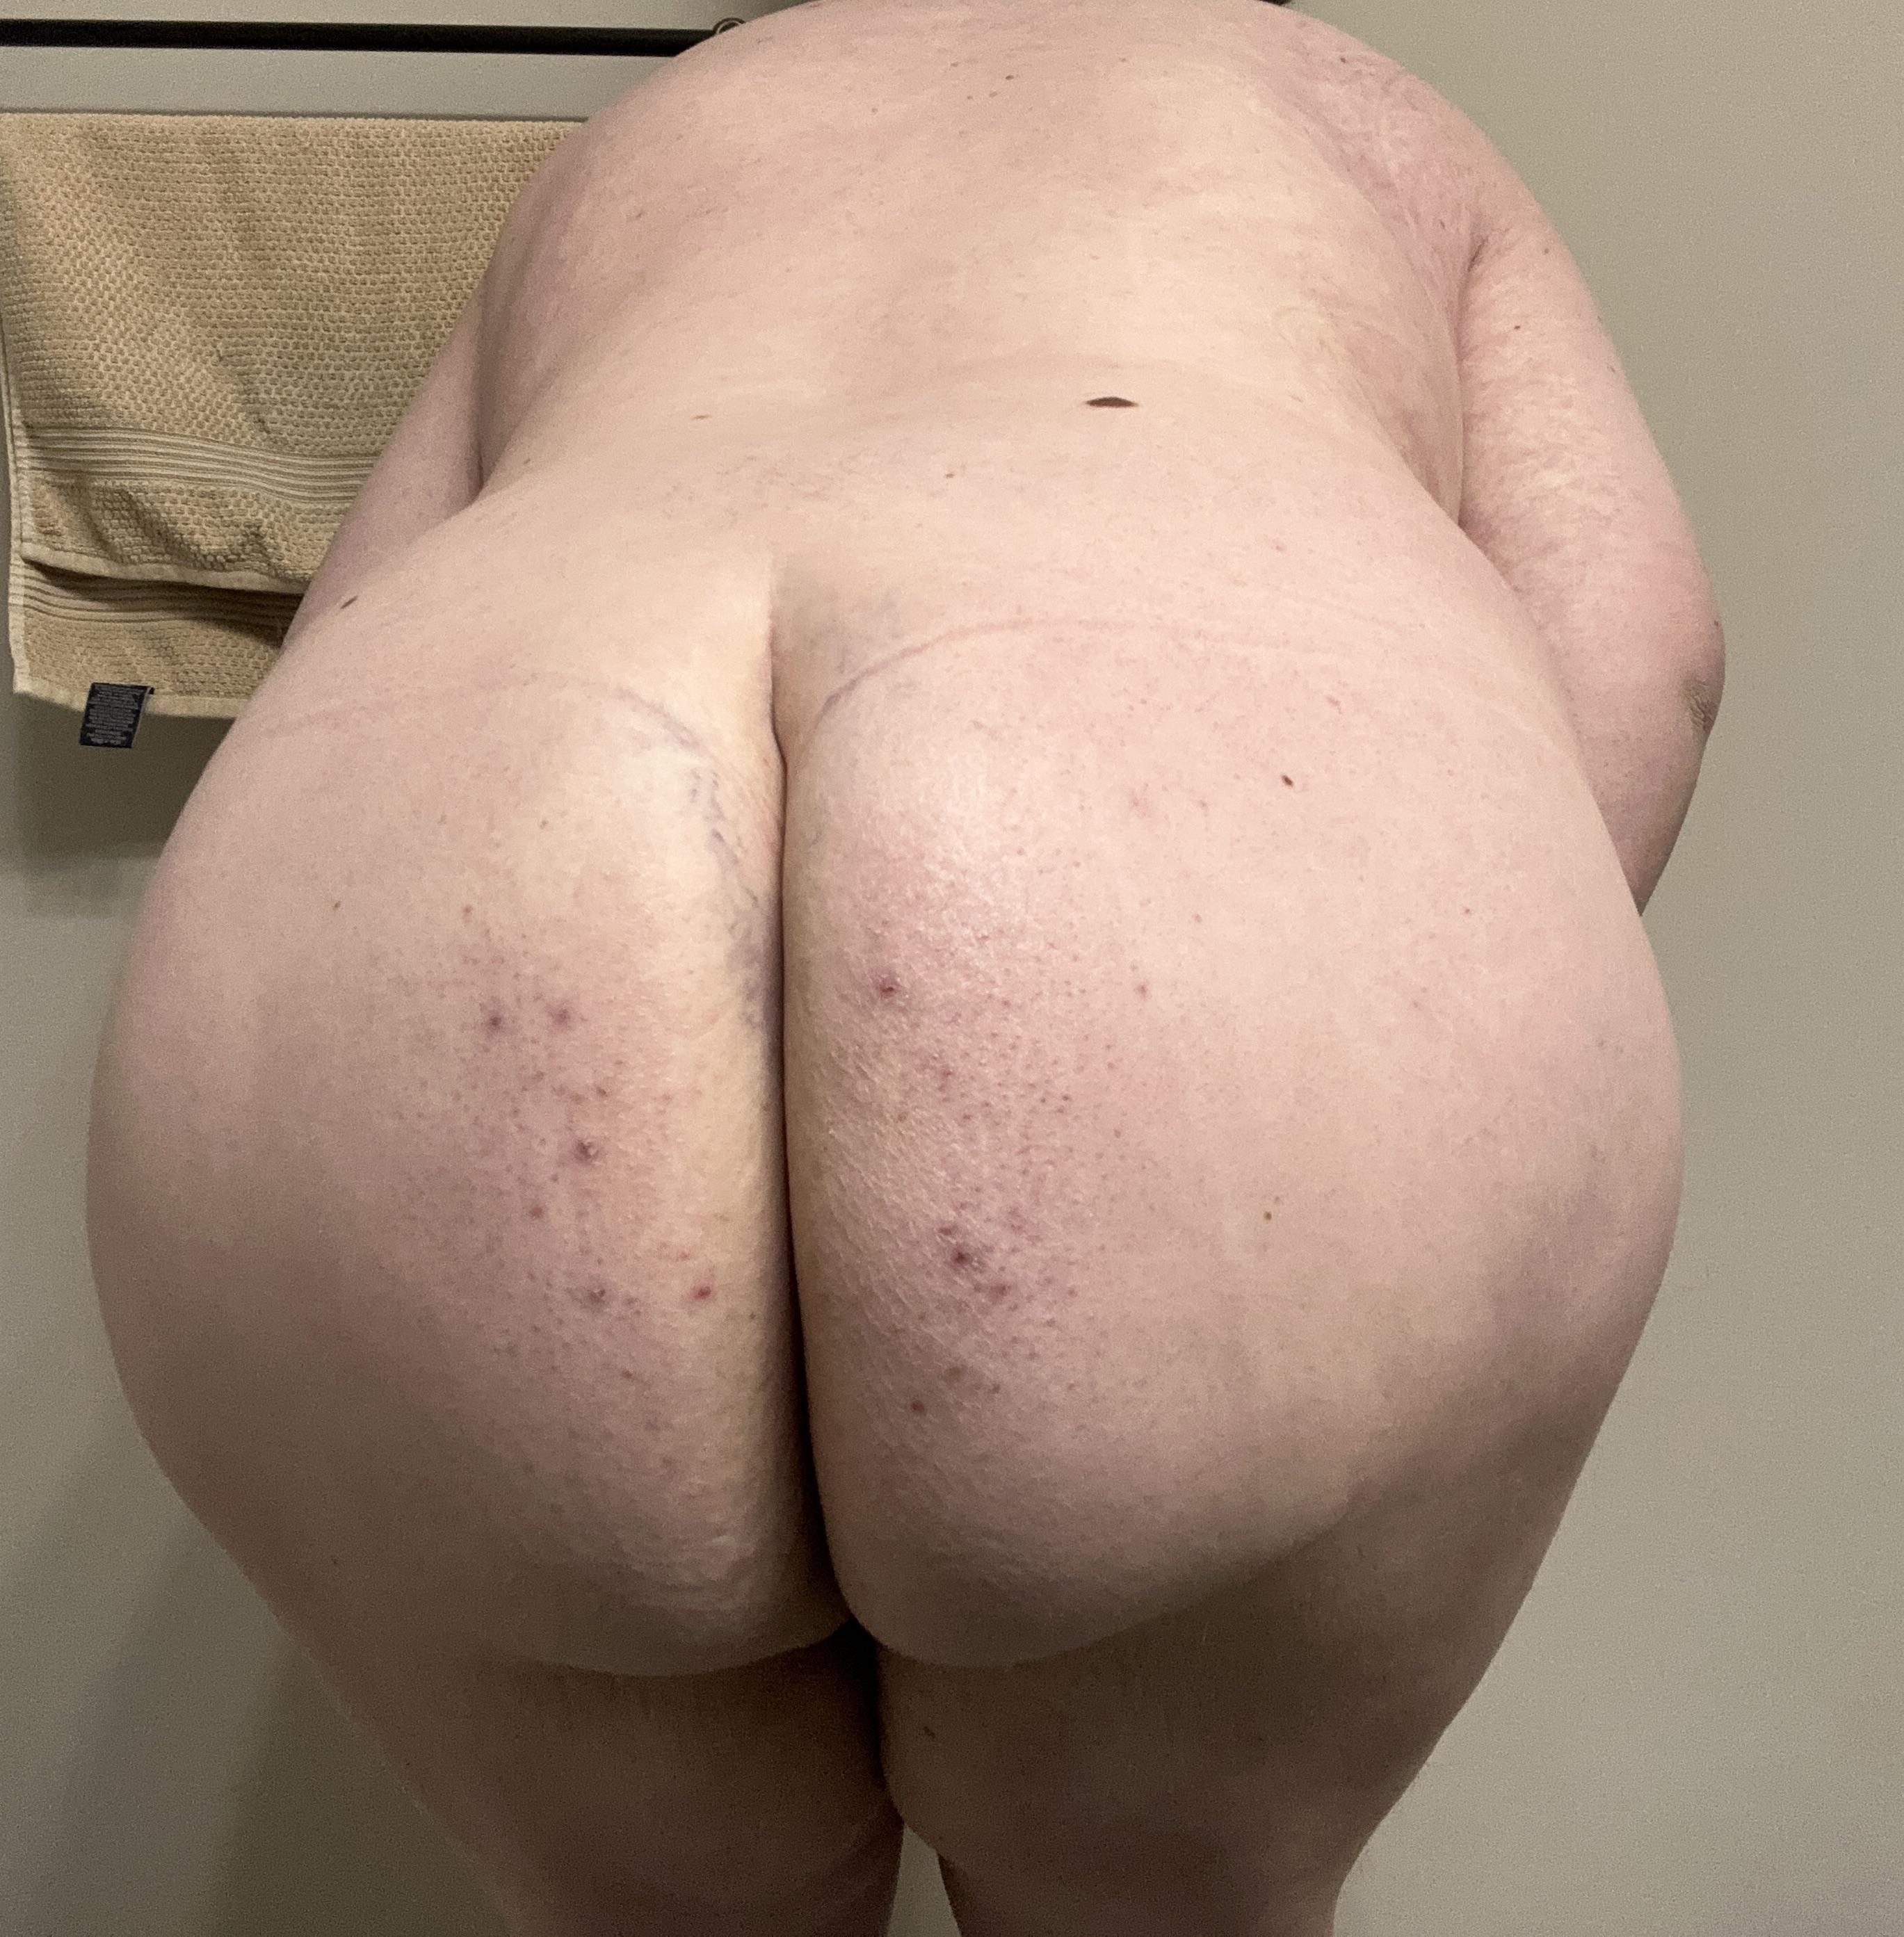 I have a big ass now 10prlwx - transexual woman